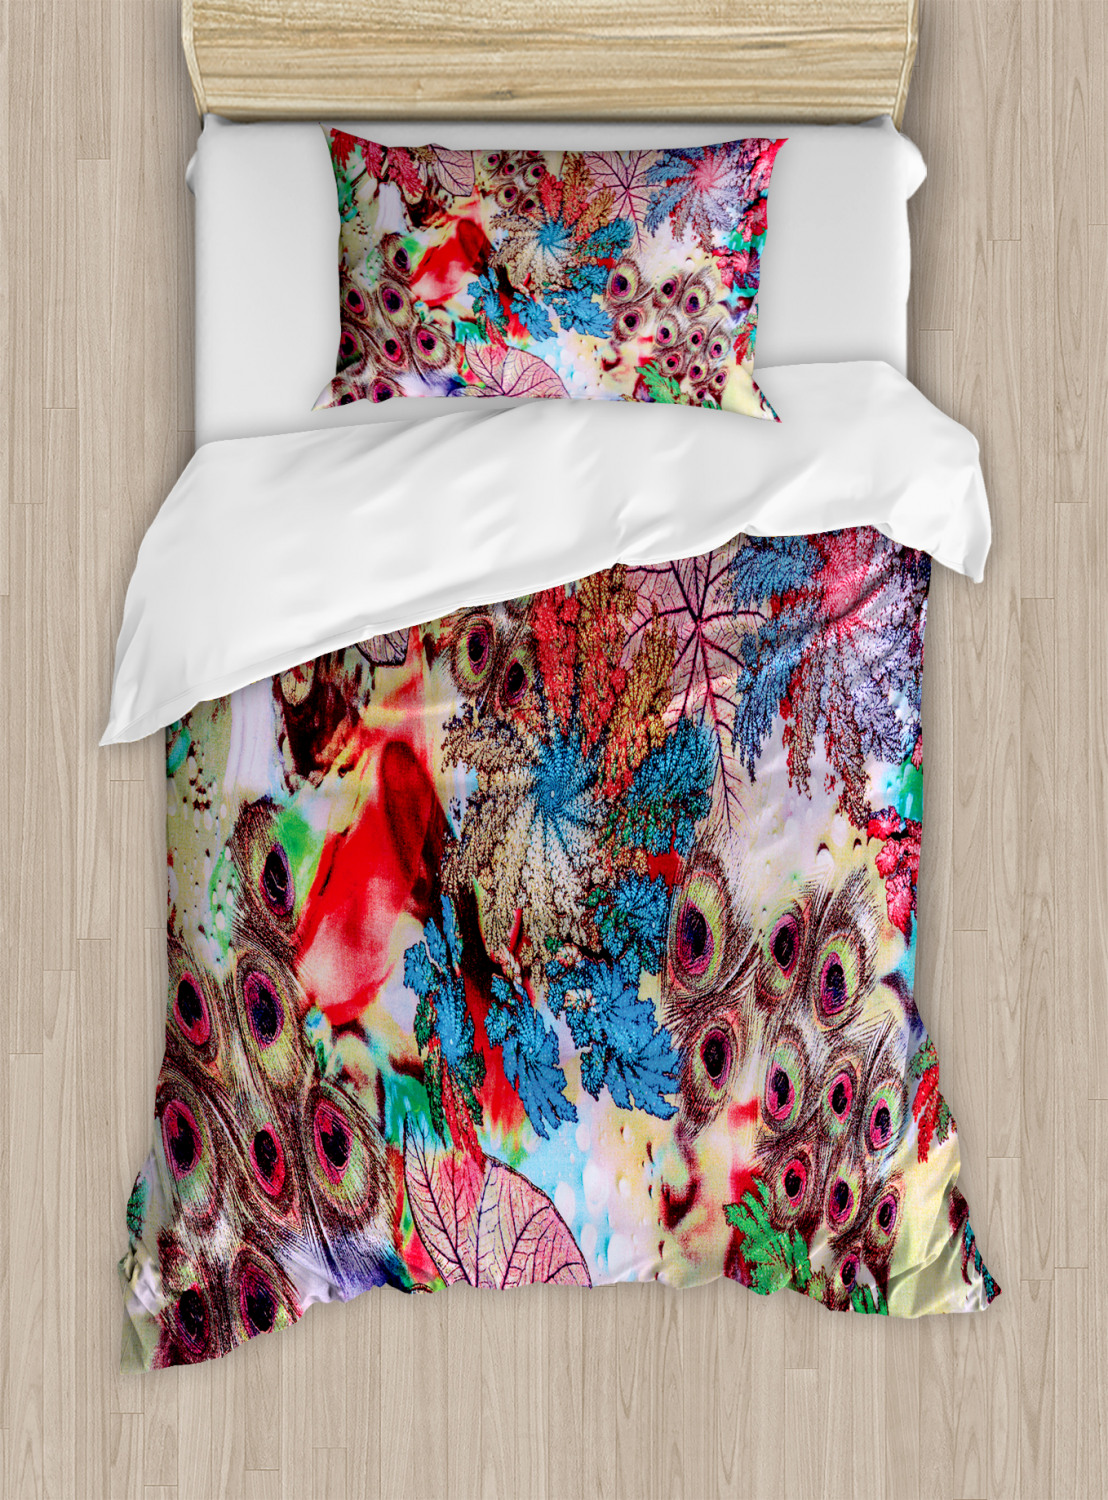 Colorful Duvet Cover Set with Pillow Shams Peacock Feather Animal Print ...